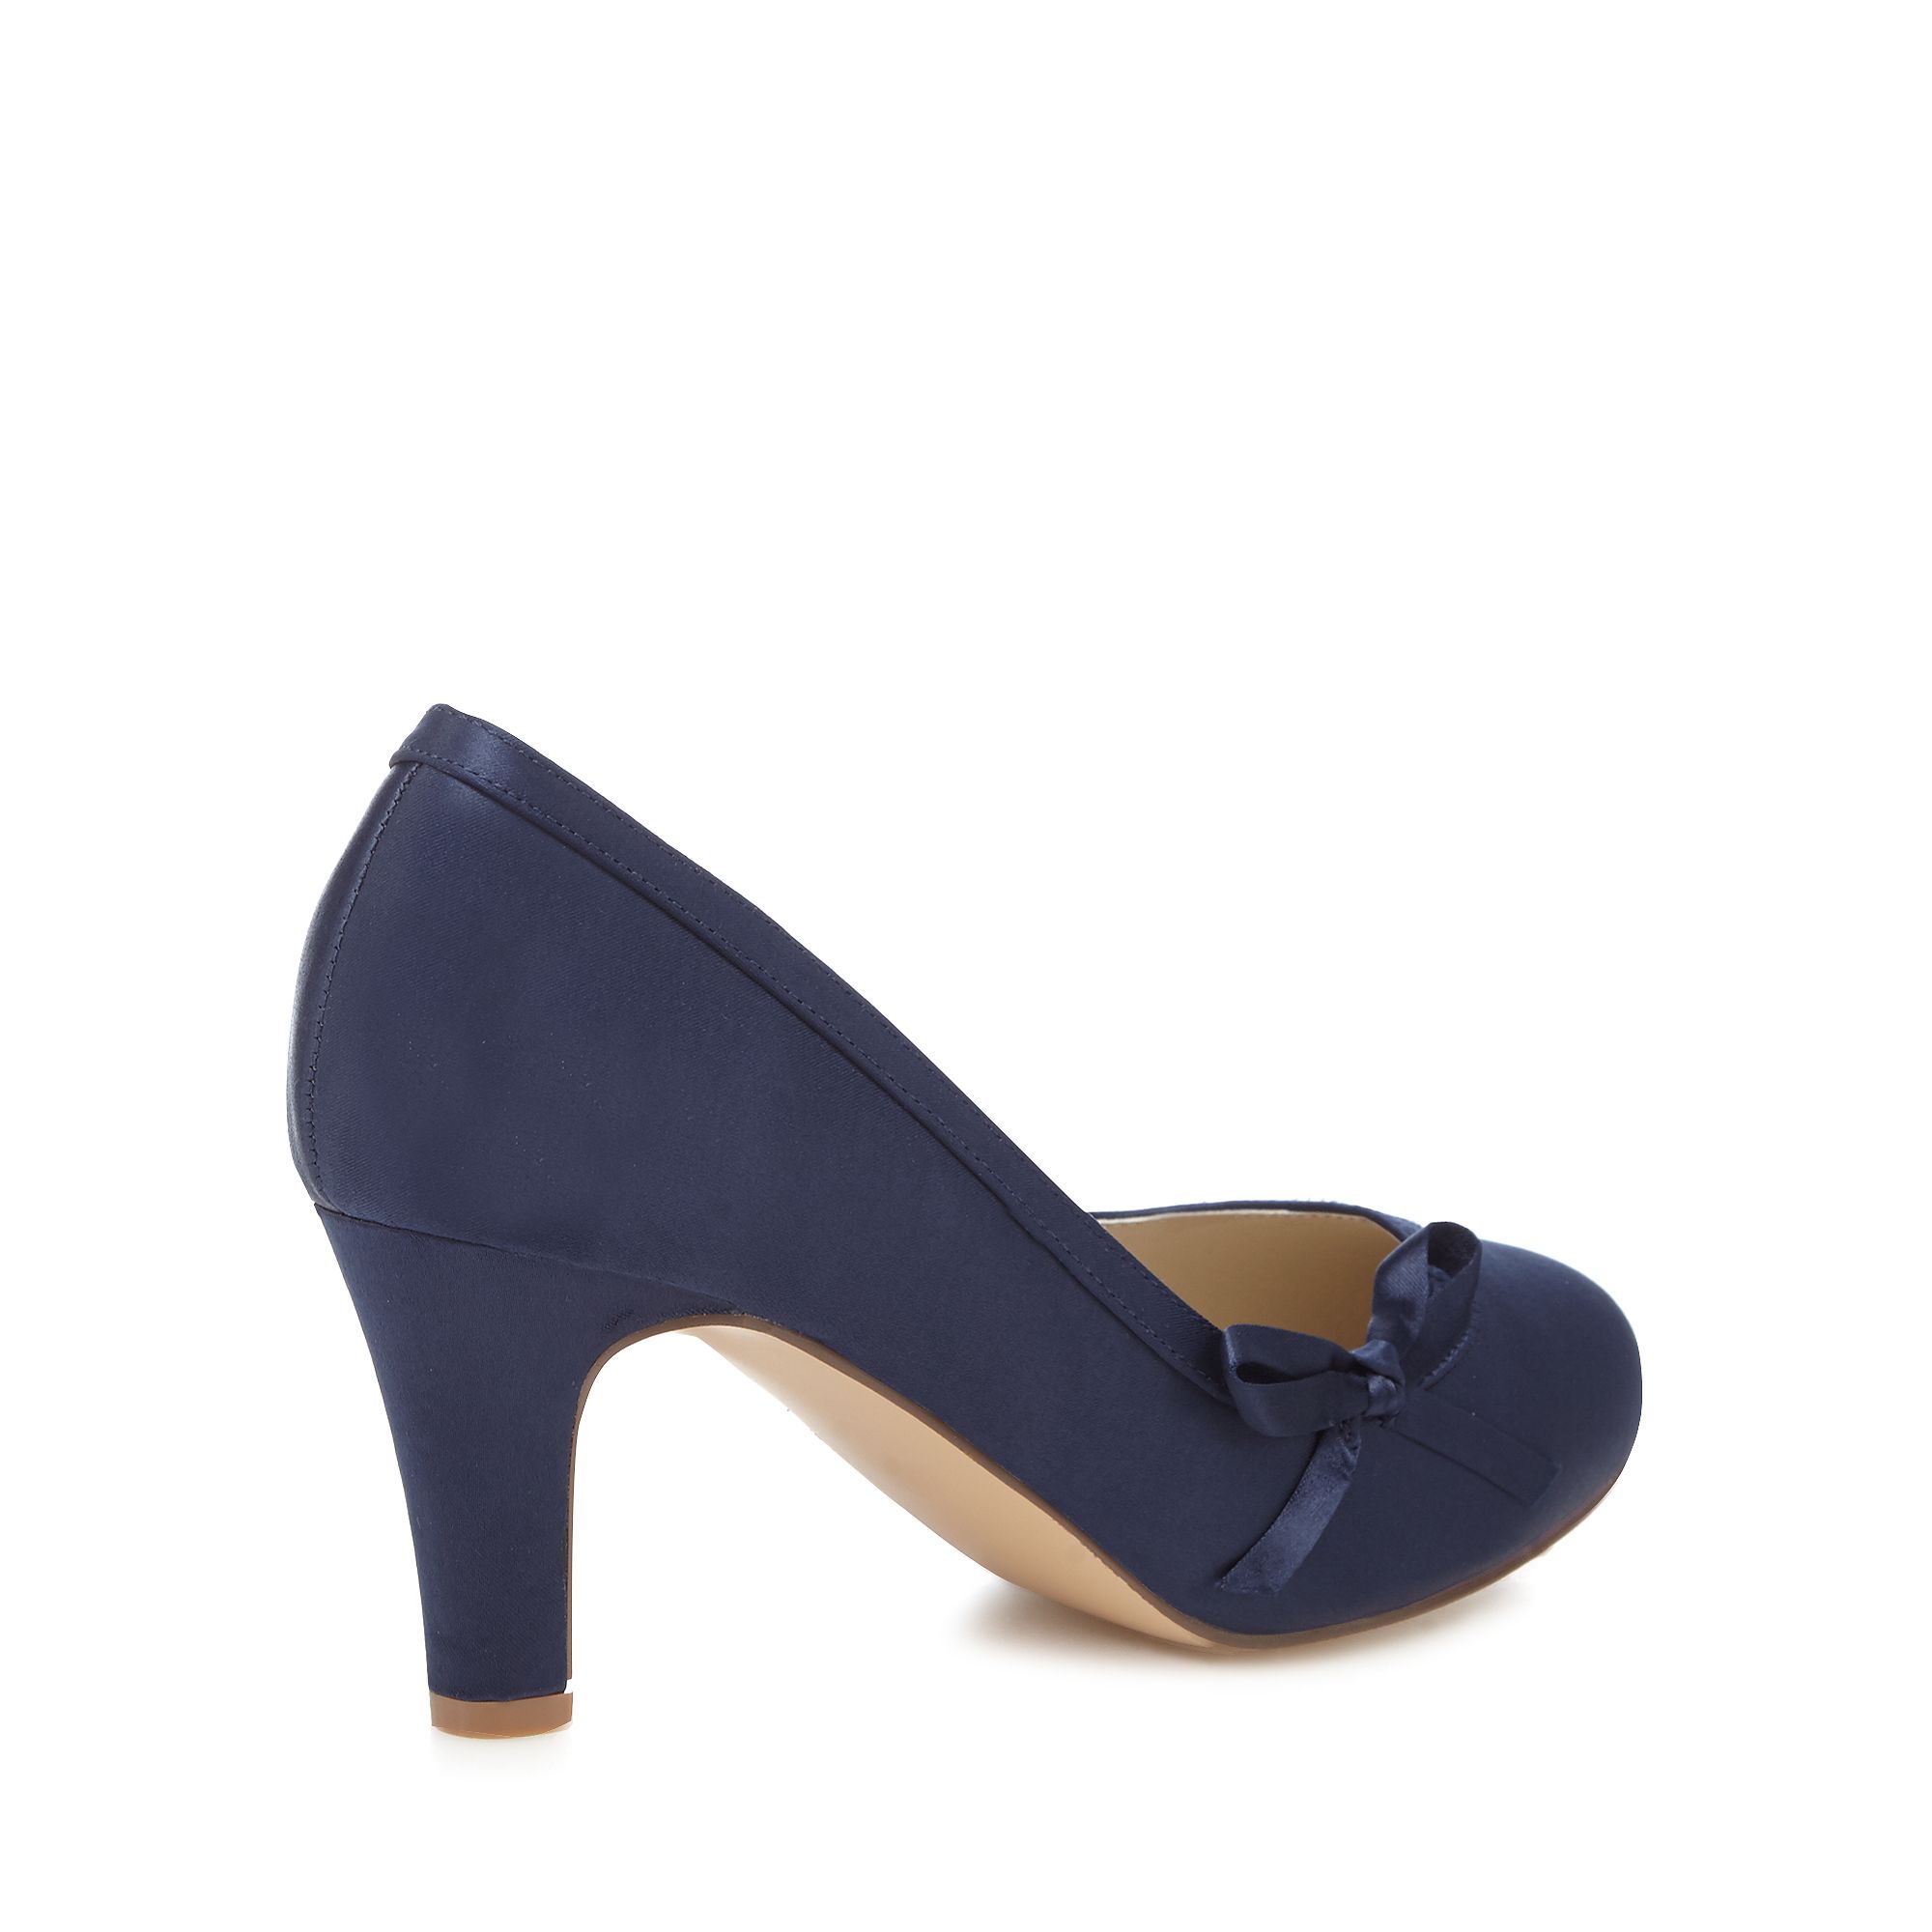 Debut Womens Navy Satin High Heel Wide Fit Court Shoes From Debenhams ...